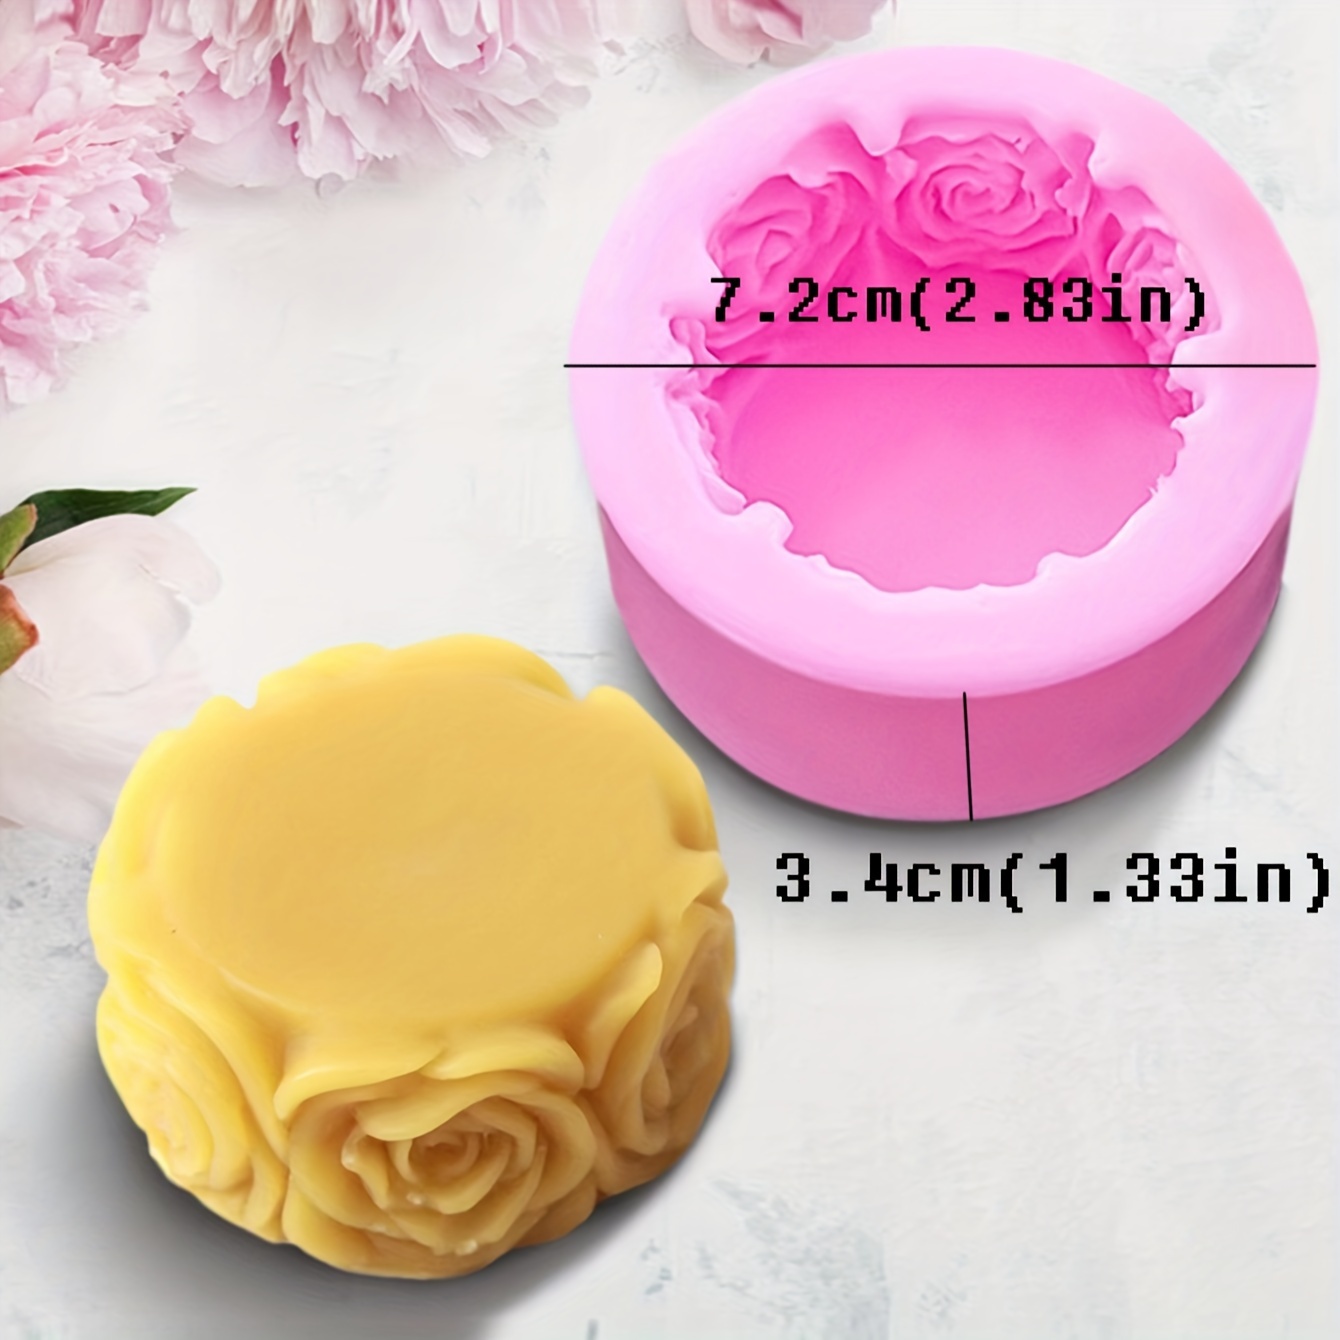 Beauty and flowers silicone mold for hand made soap and crafts